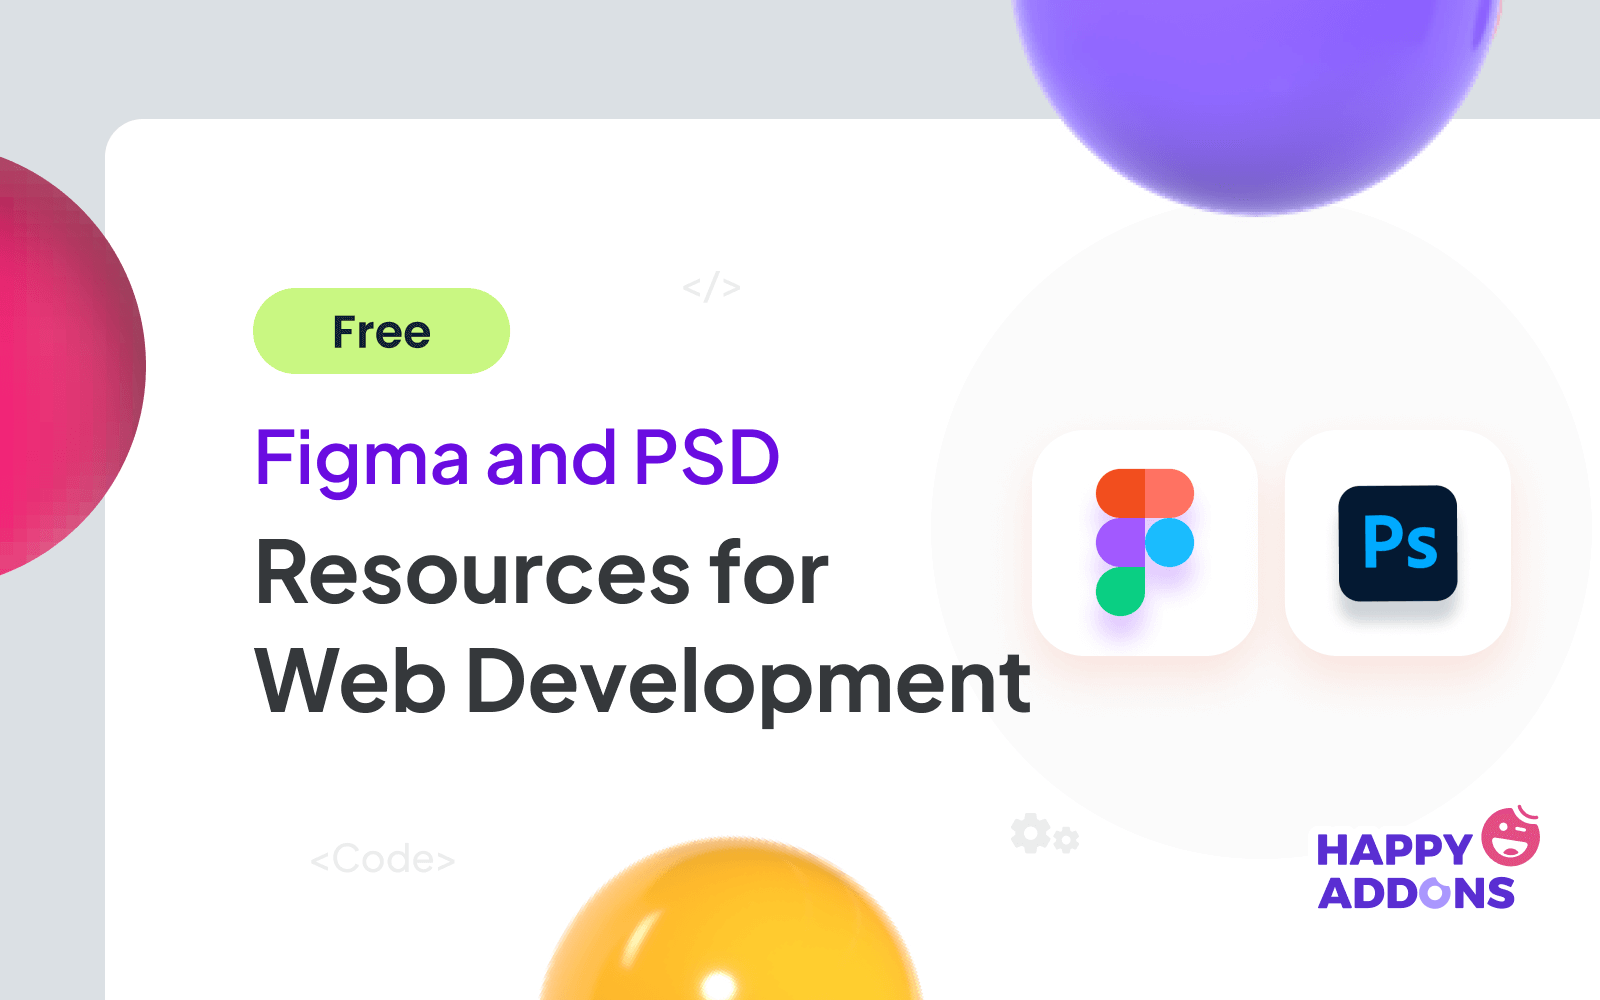 Free Figma Resources and PSD Files for Web Development